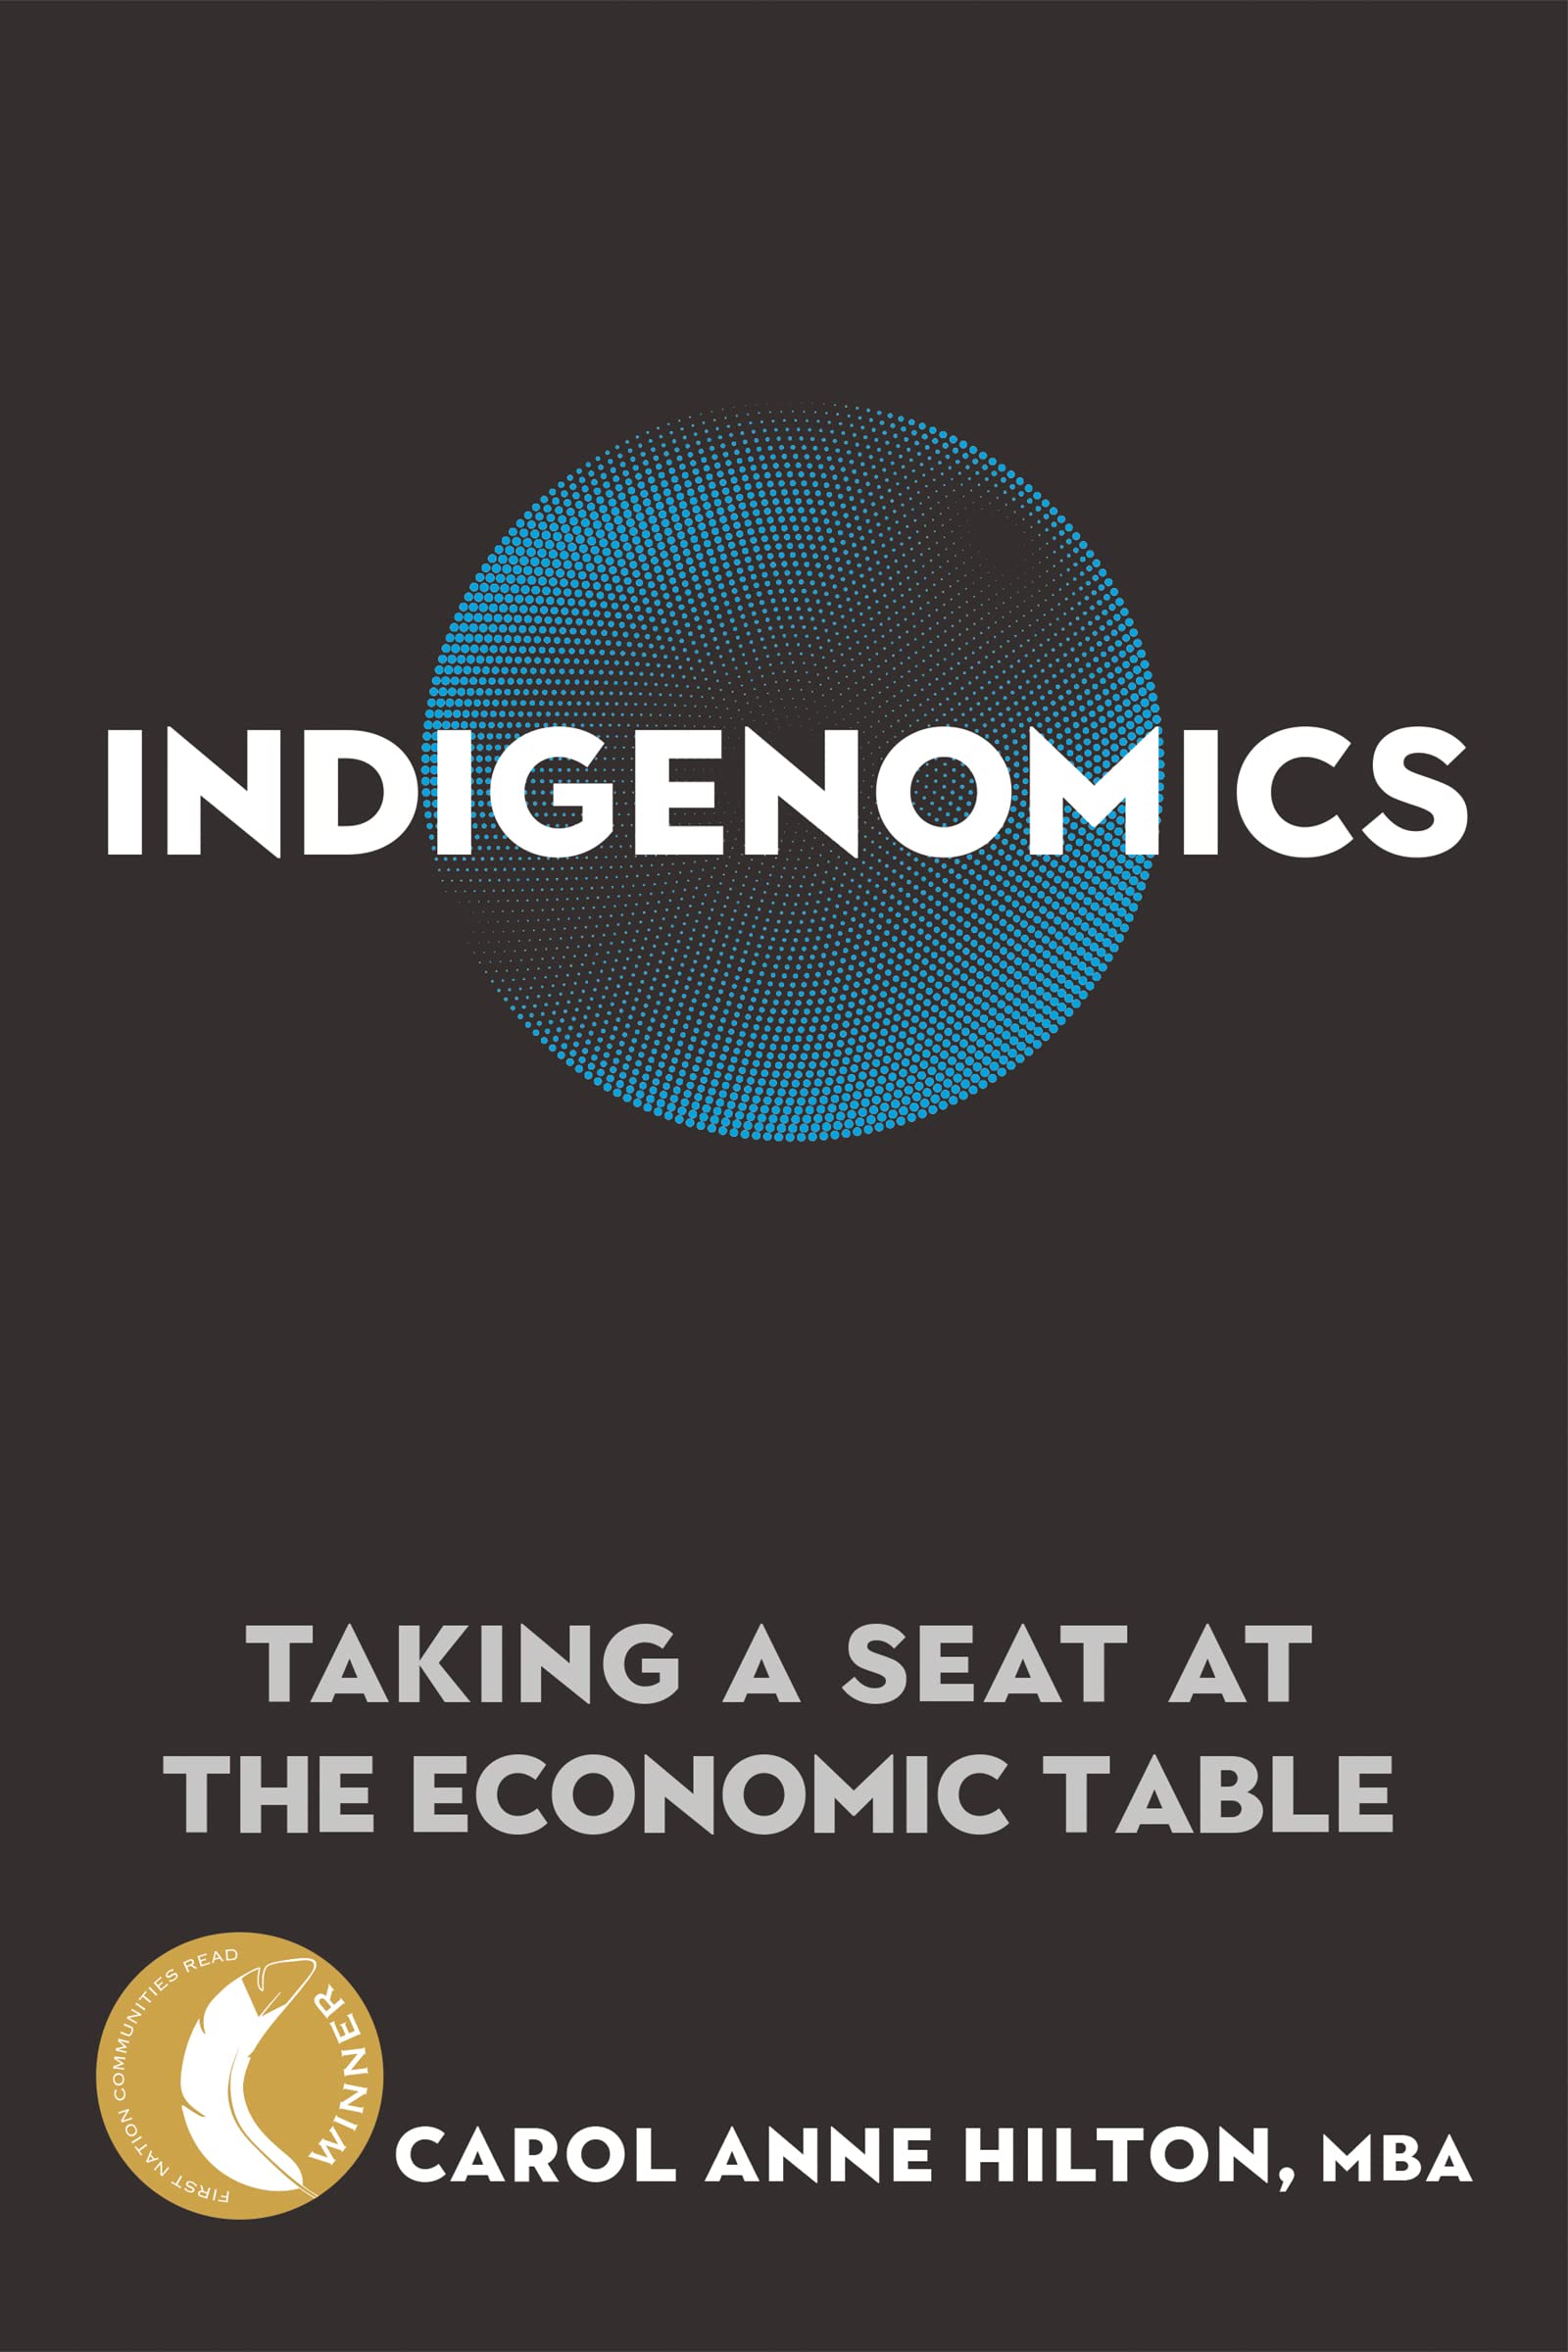 Indigenomics: Taking a Seat at the Economic Table